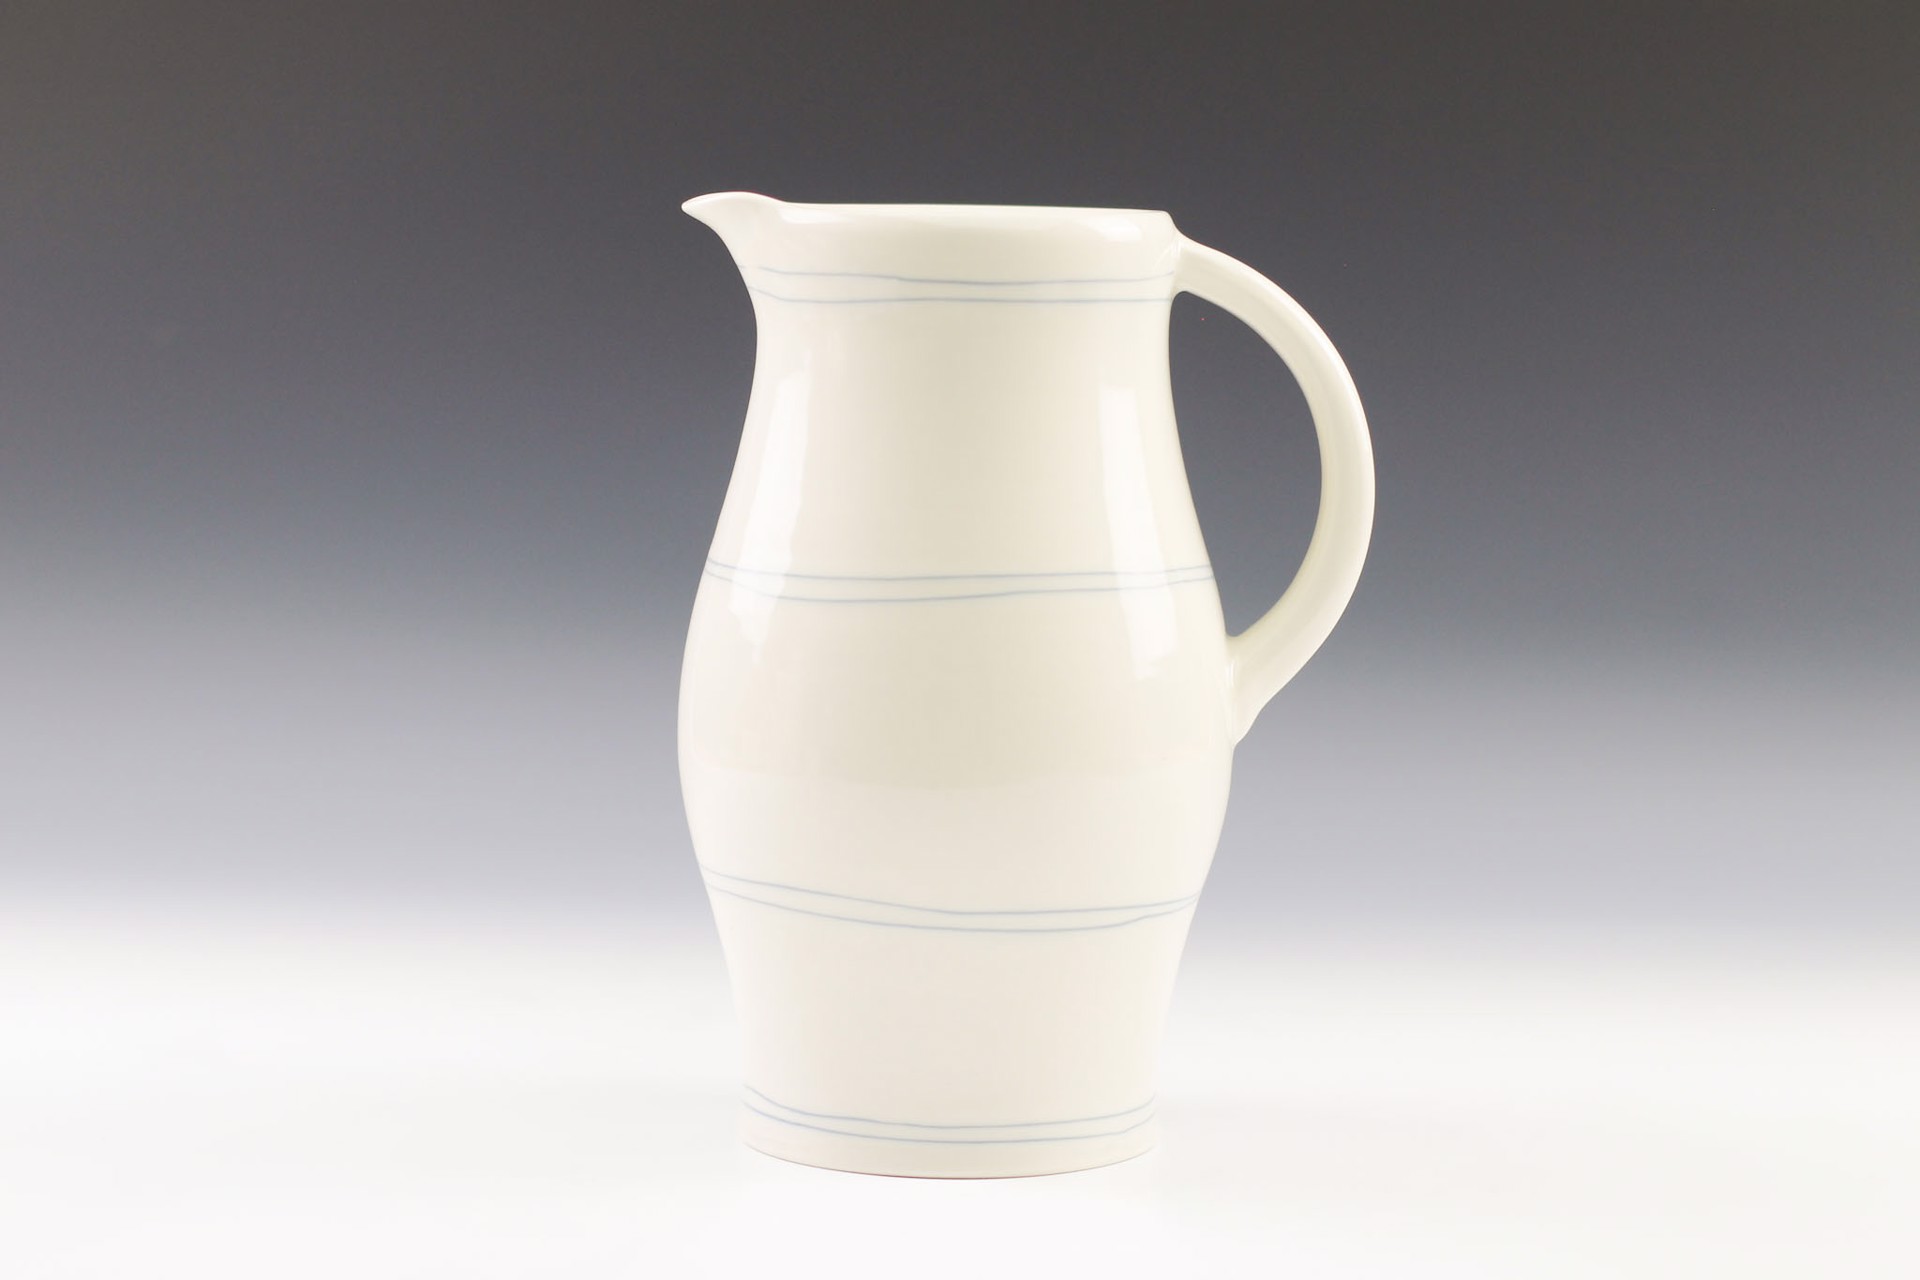 Pitcher by Rob Cartelli